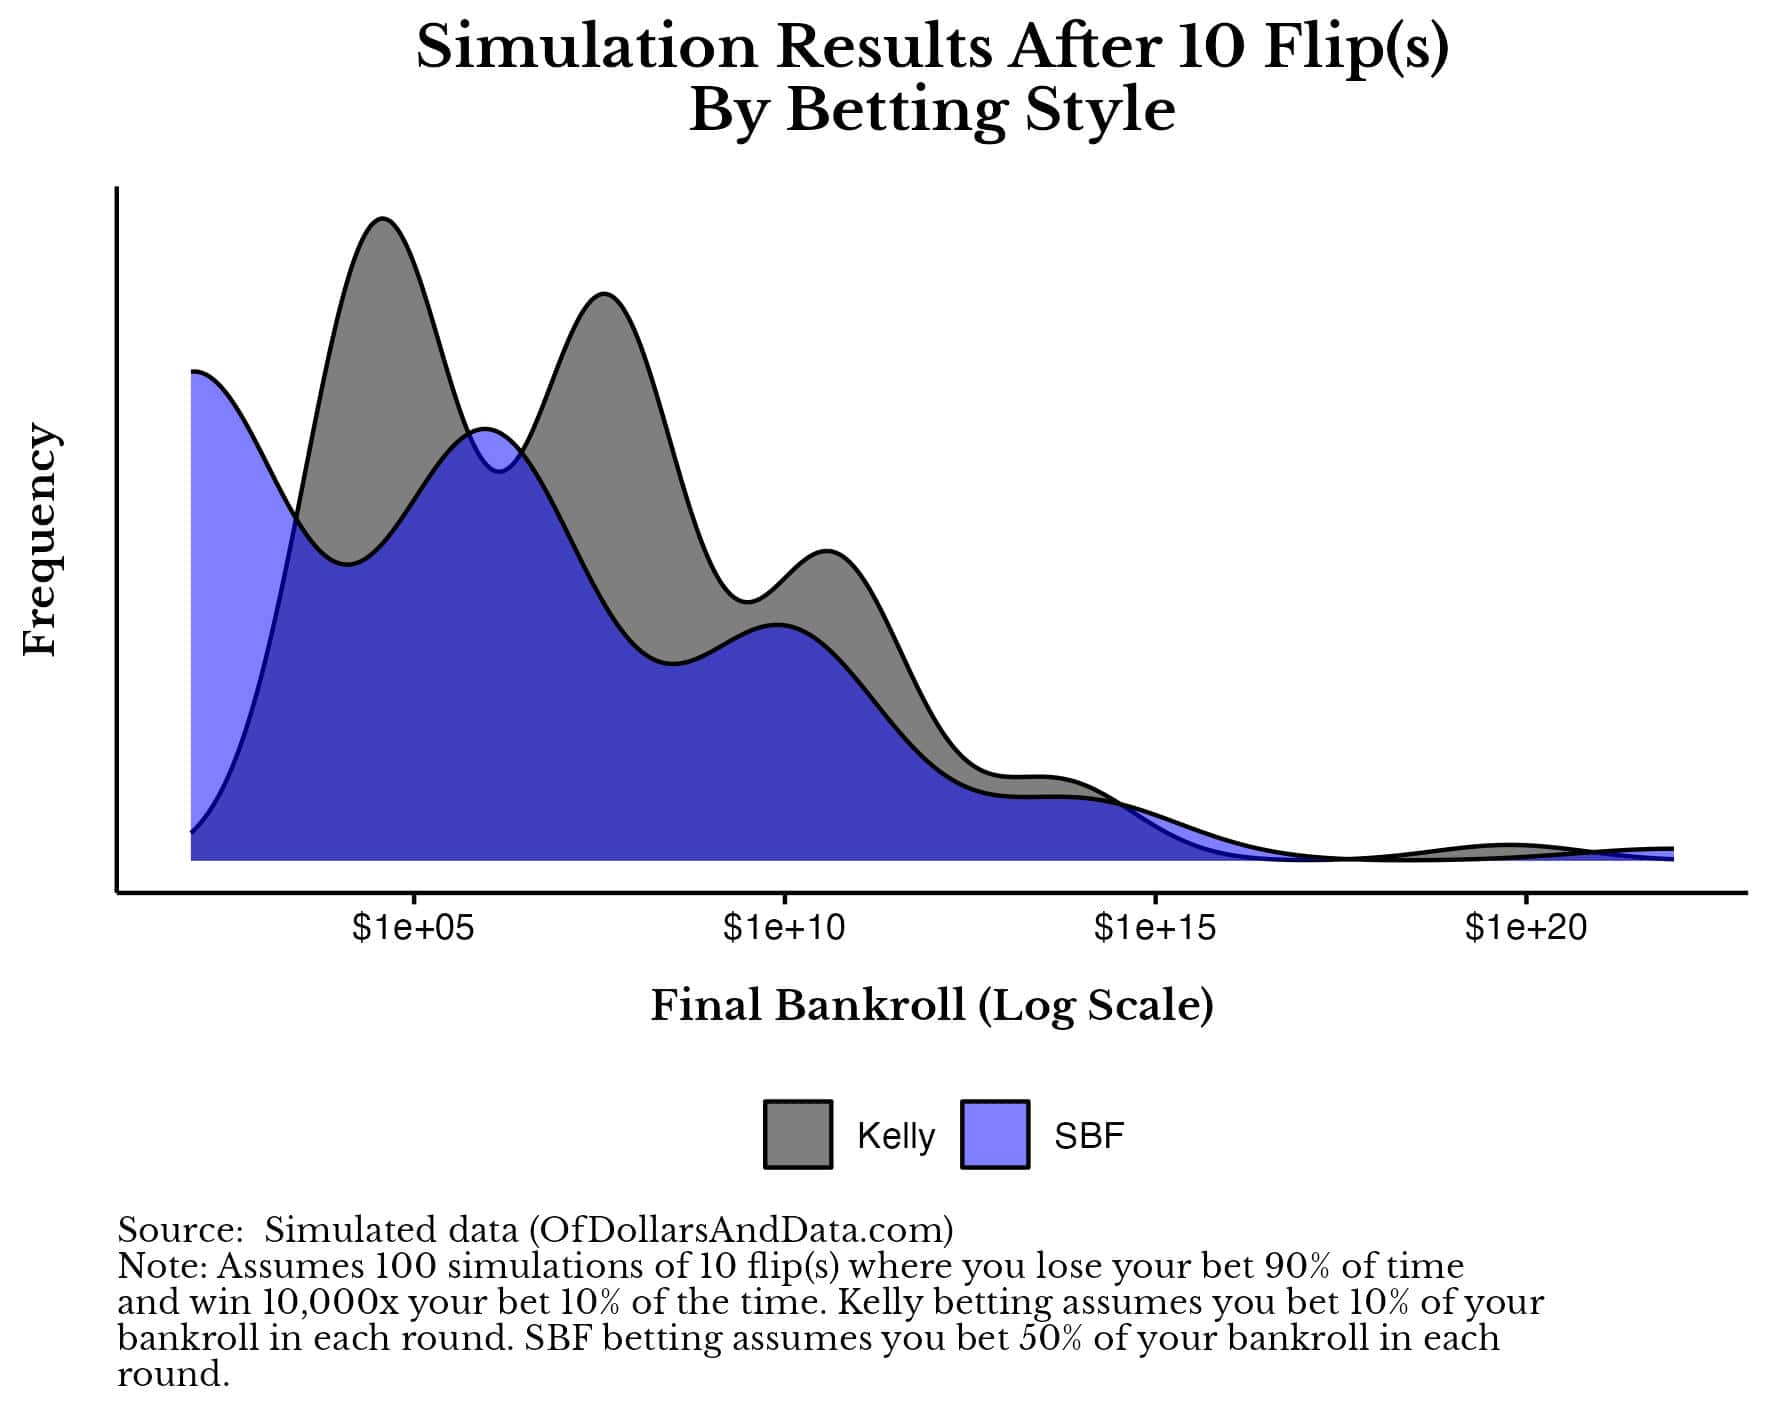 Chart of Kelly vs. SBF betting style for 10 flip game.